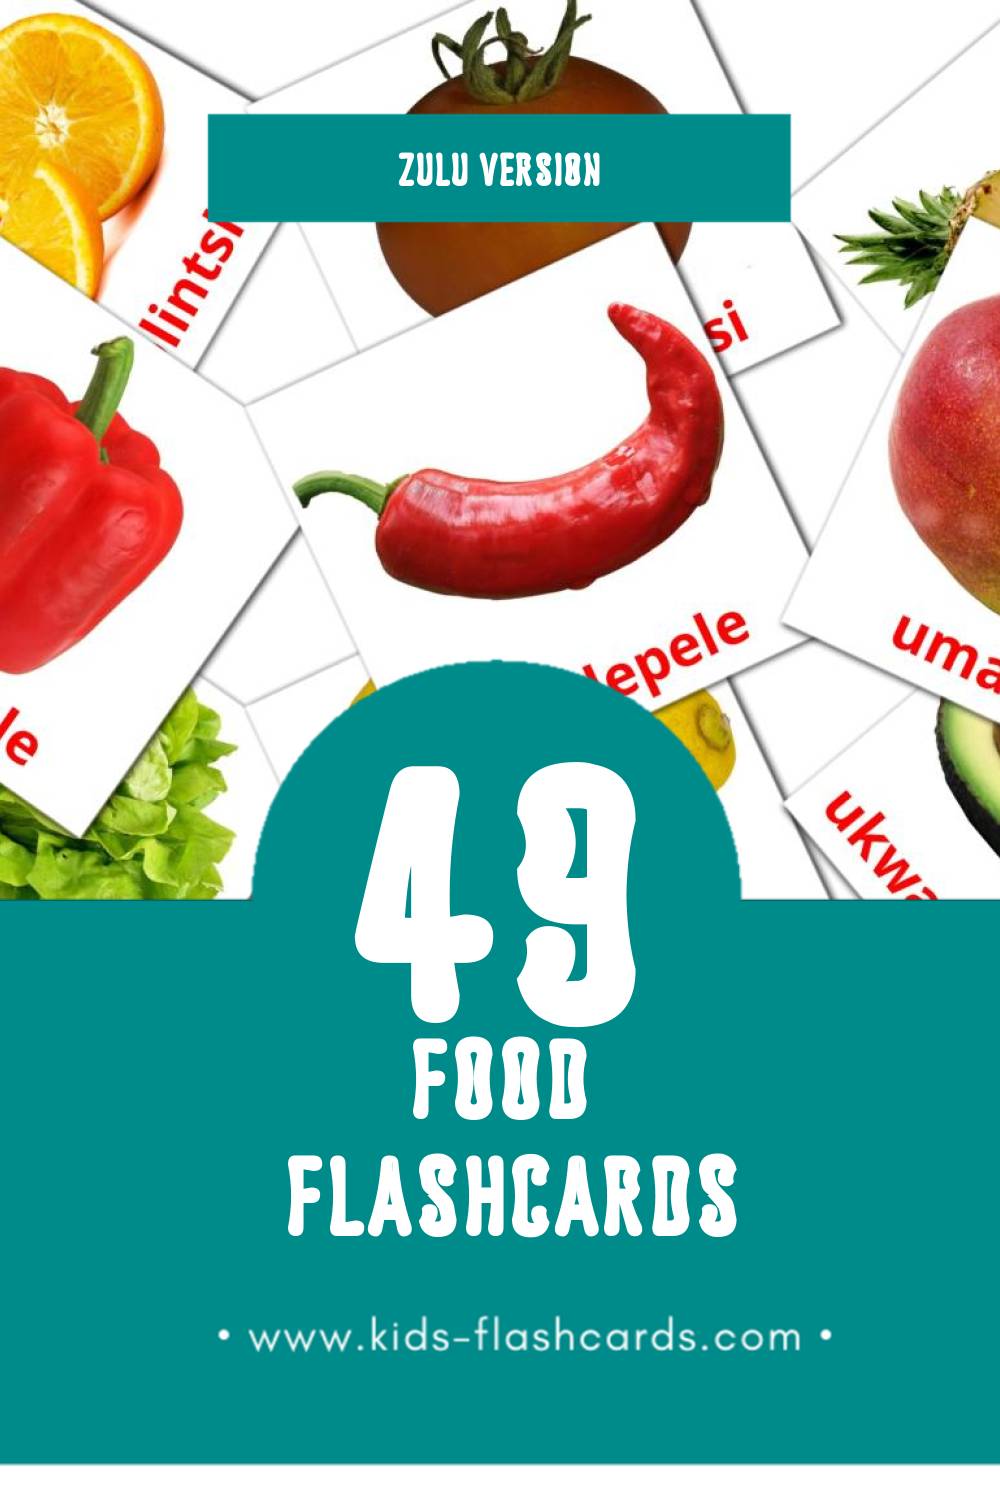 Visual ukudla Flashcards for Toddlers (49 cards in Zulu)